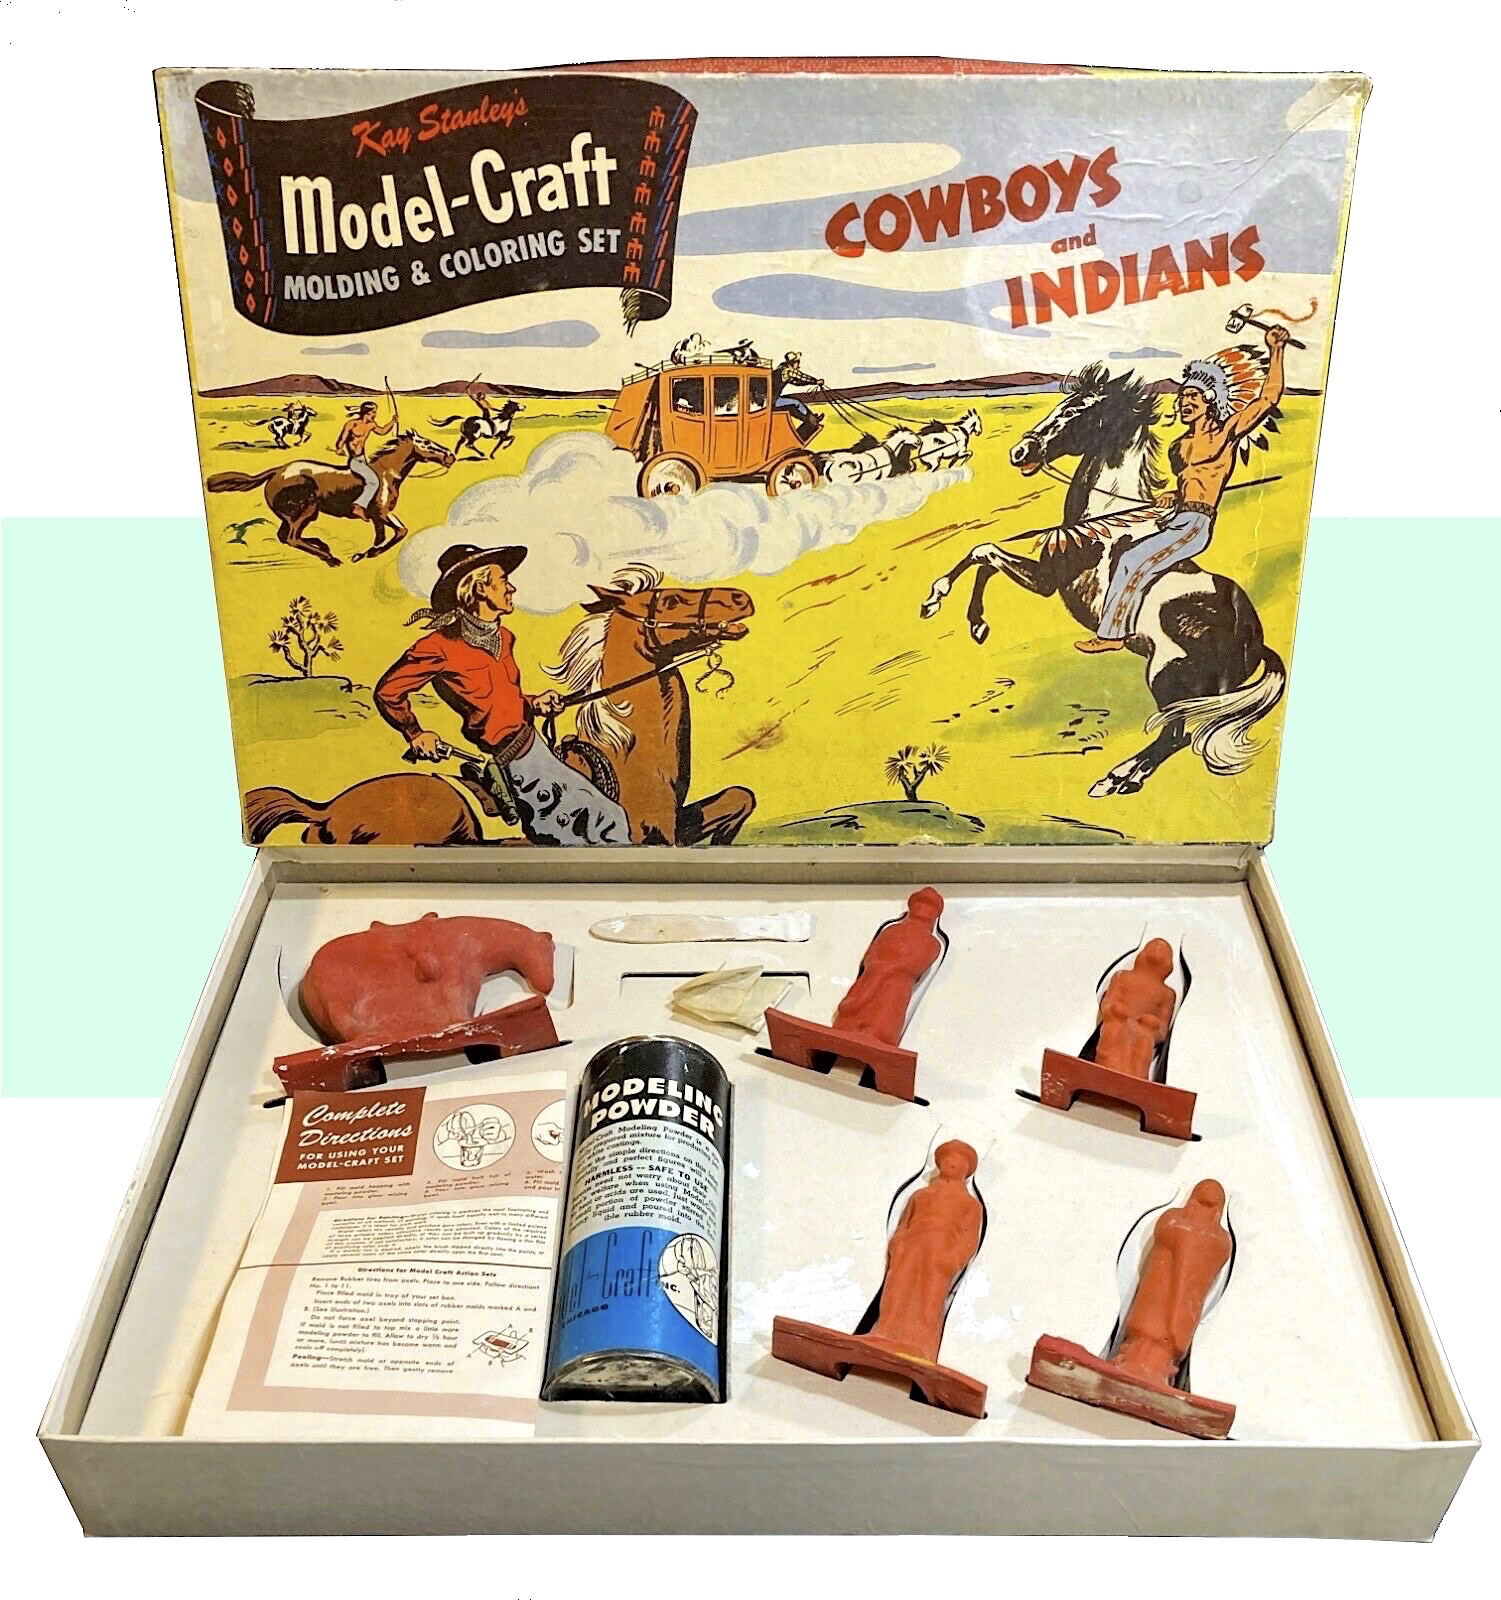 Model-Craft cowboys and indians